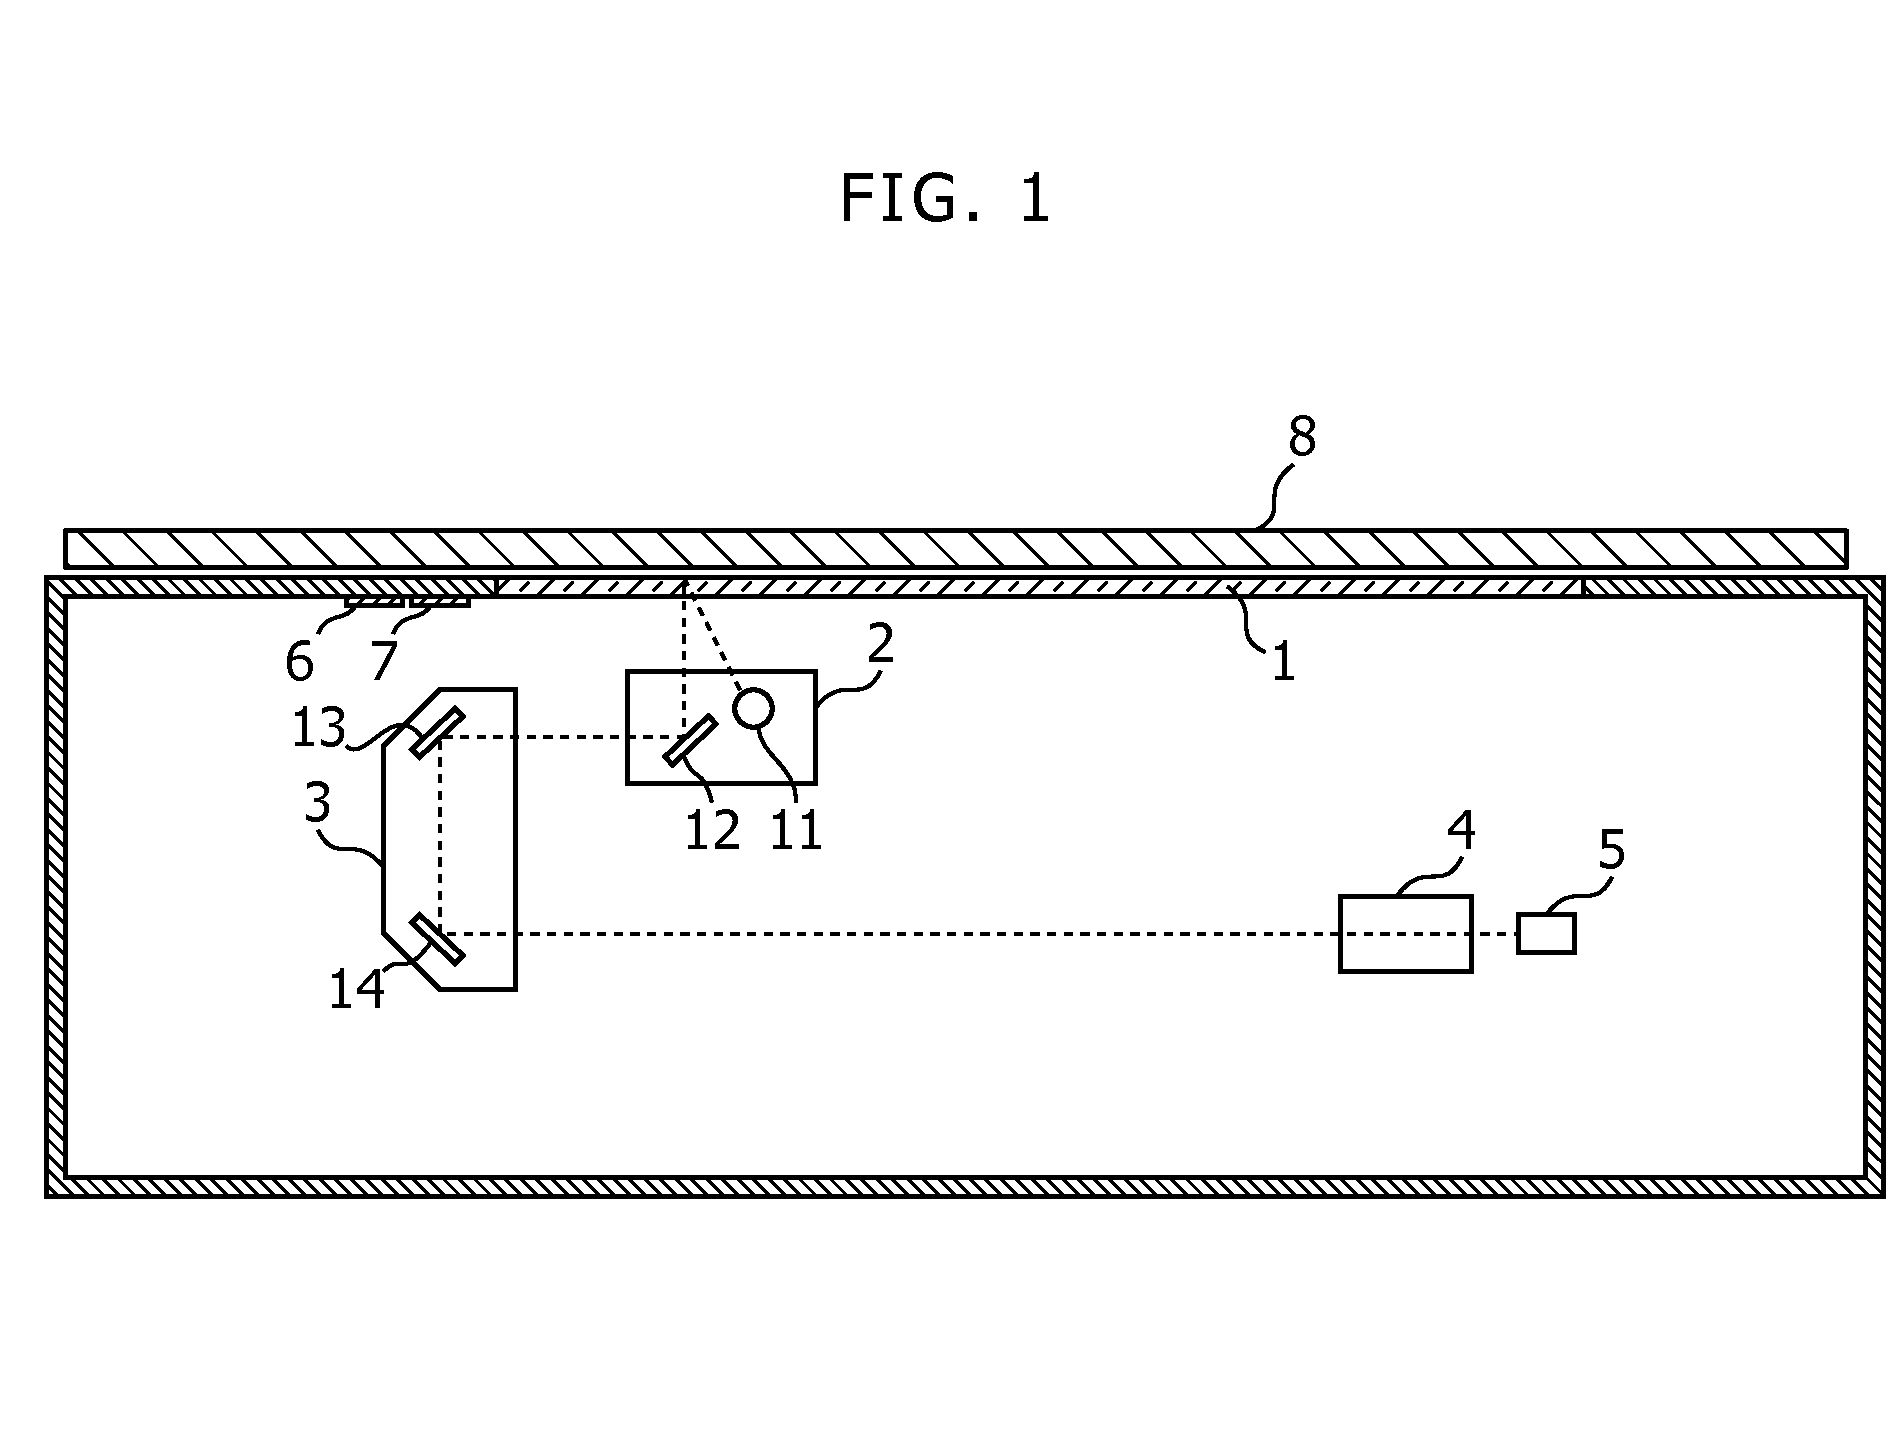 Image scanning device with improved dew condensation detection and correction